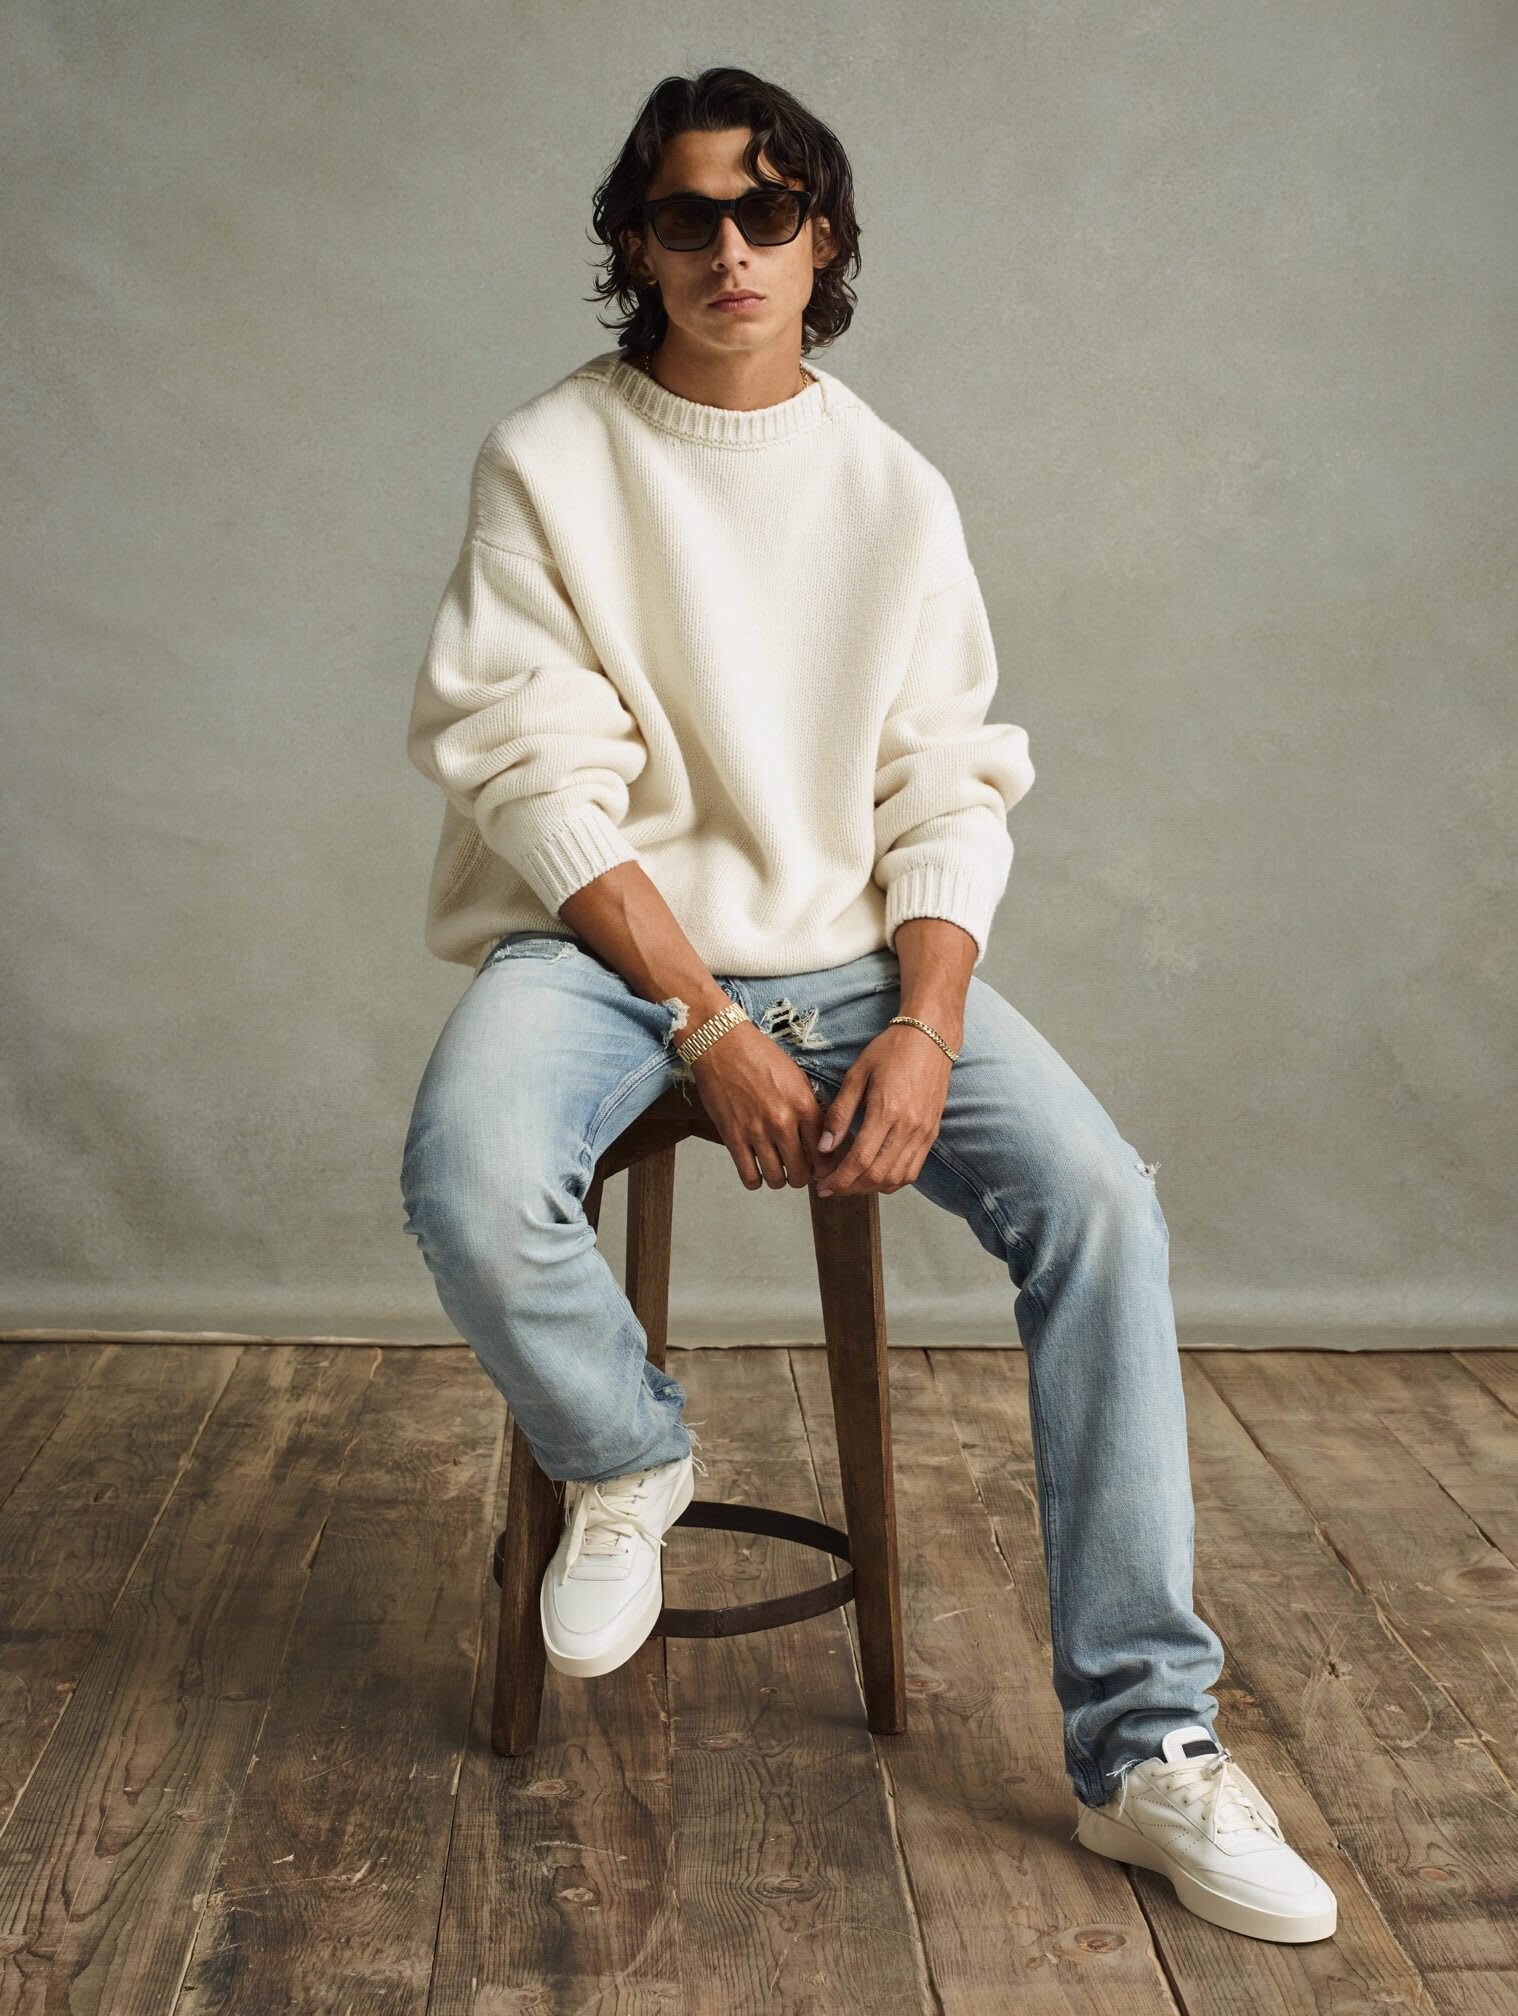 Jerry Lorenzo showcases Fear of God's Highly Anticipated lookbook